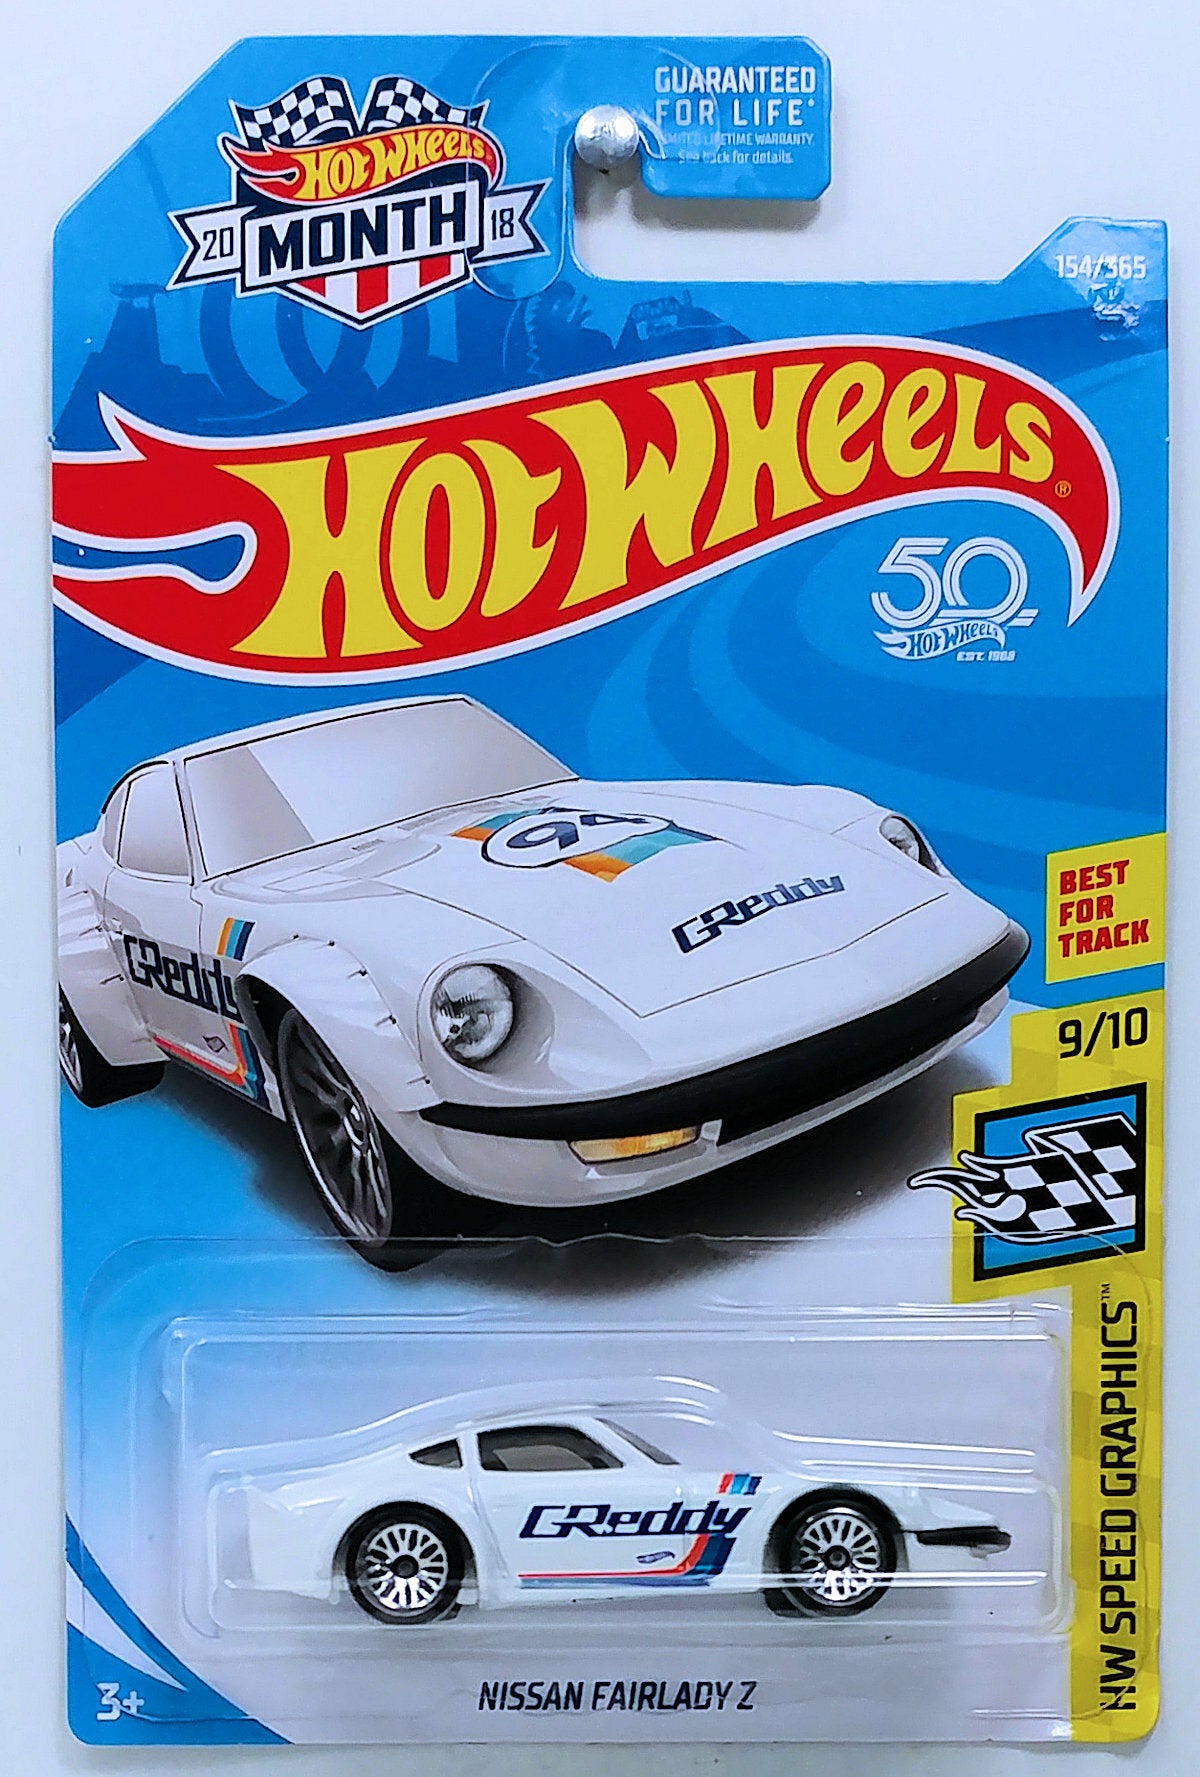 Hot Wheels 2018 - Collector # 154/365 - Nissan Fairlady Z - MONTH